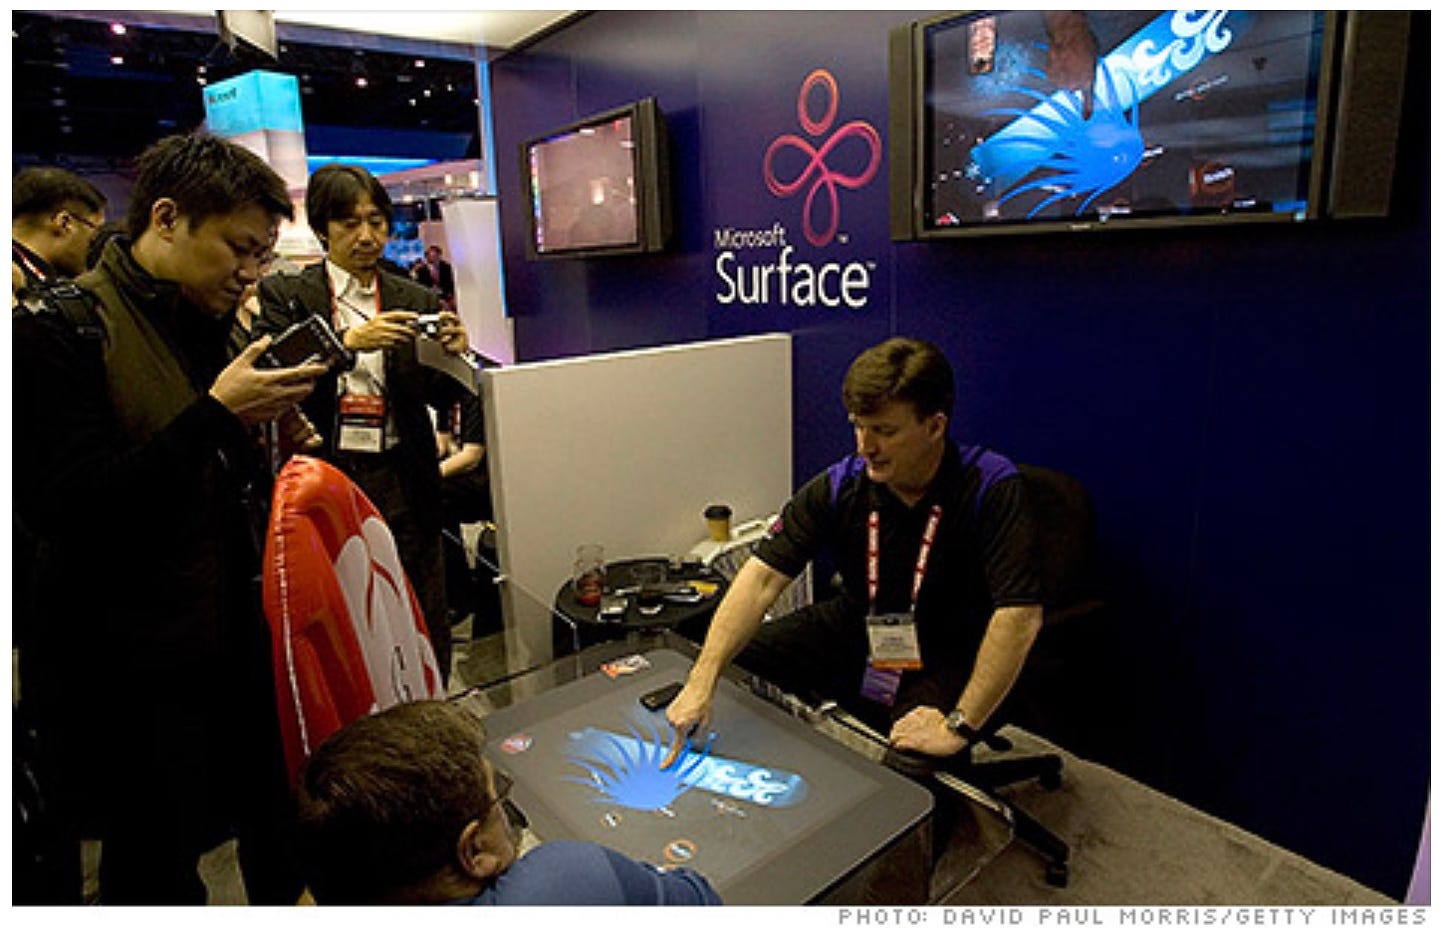 Microsoft employee at a trade show demonstrating the original Surface Table. He's seated in a standard chair touching the big screen that is on top of a table while people look on.